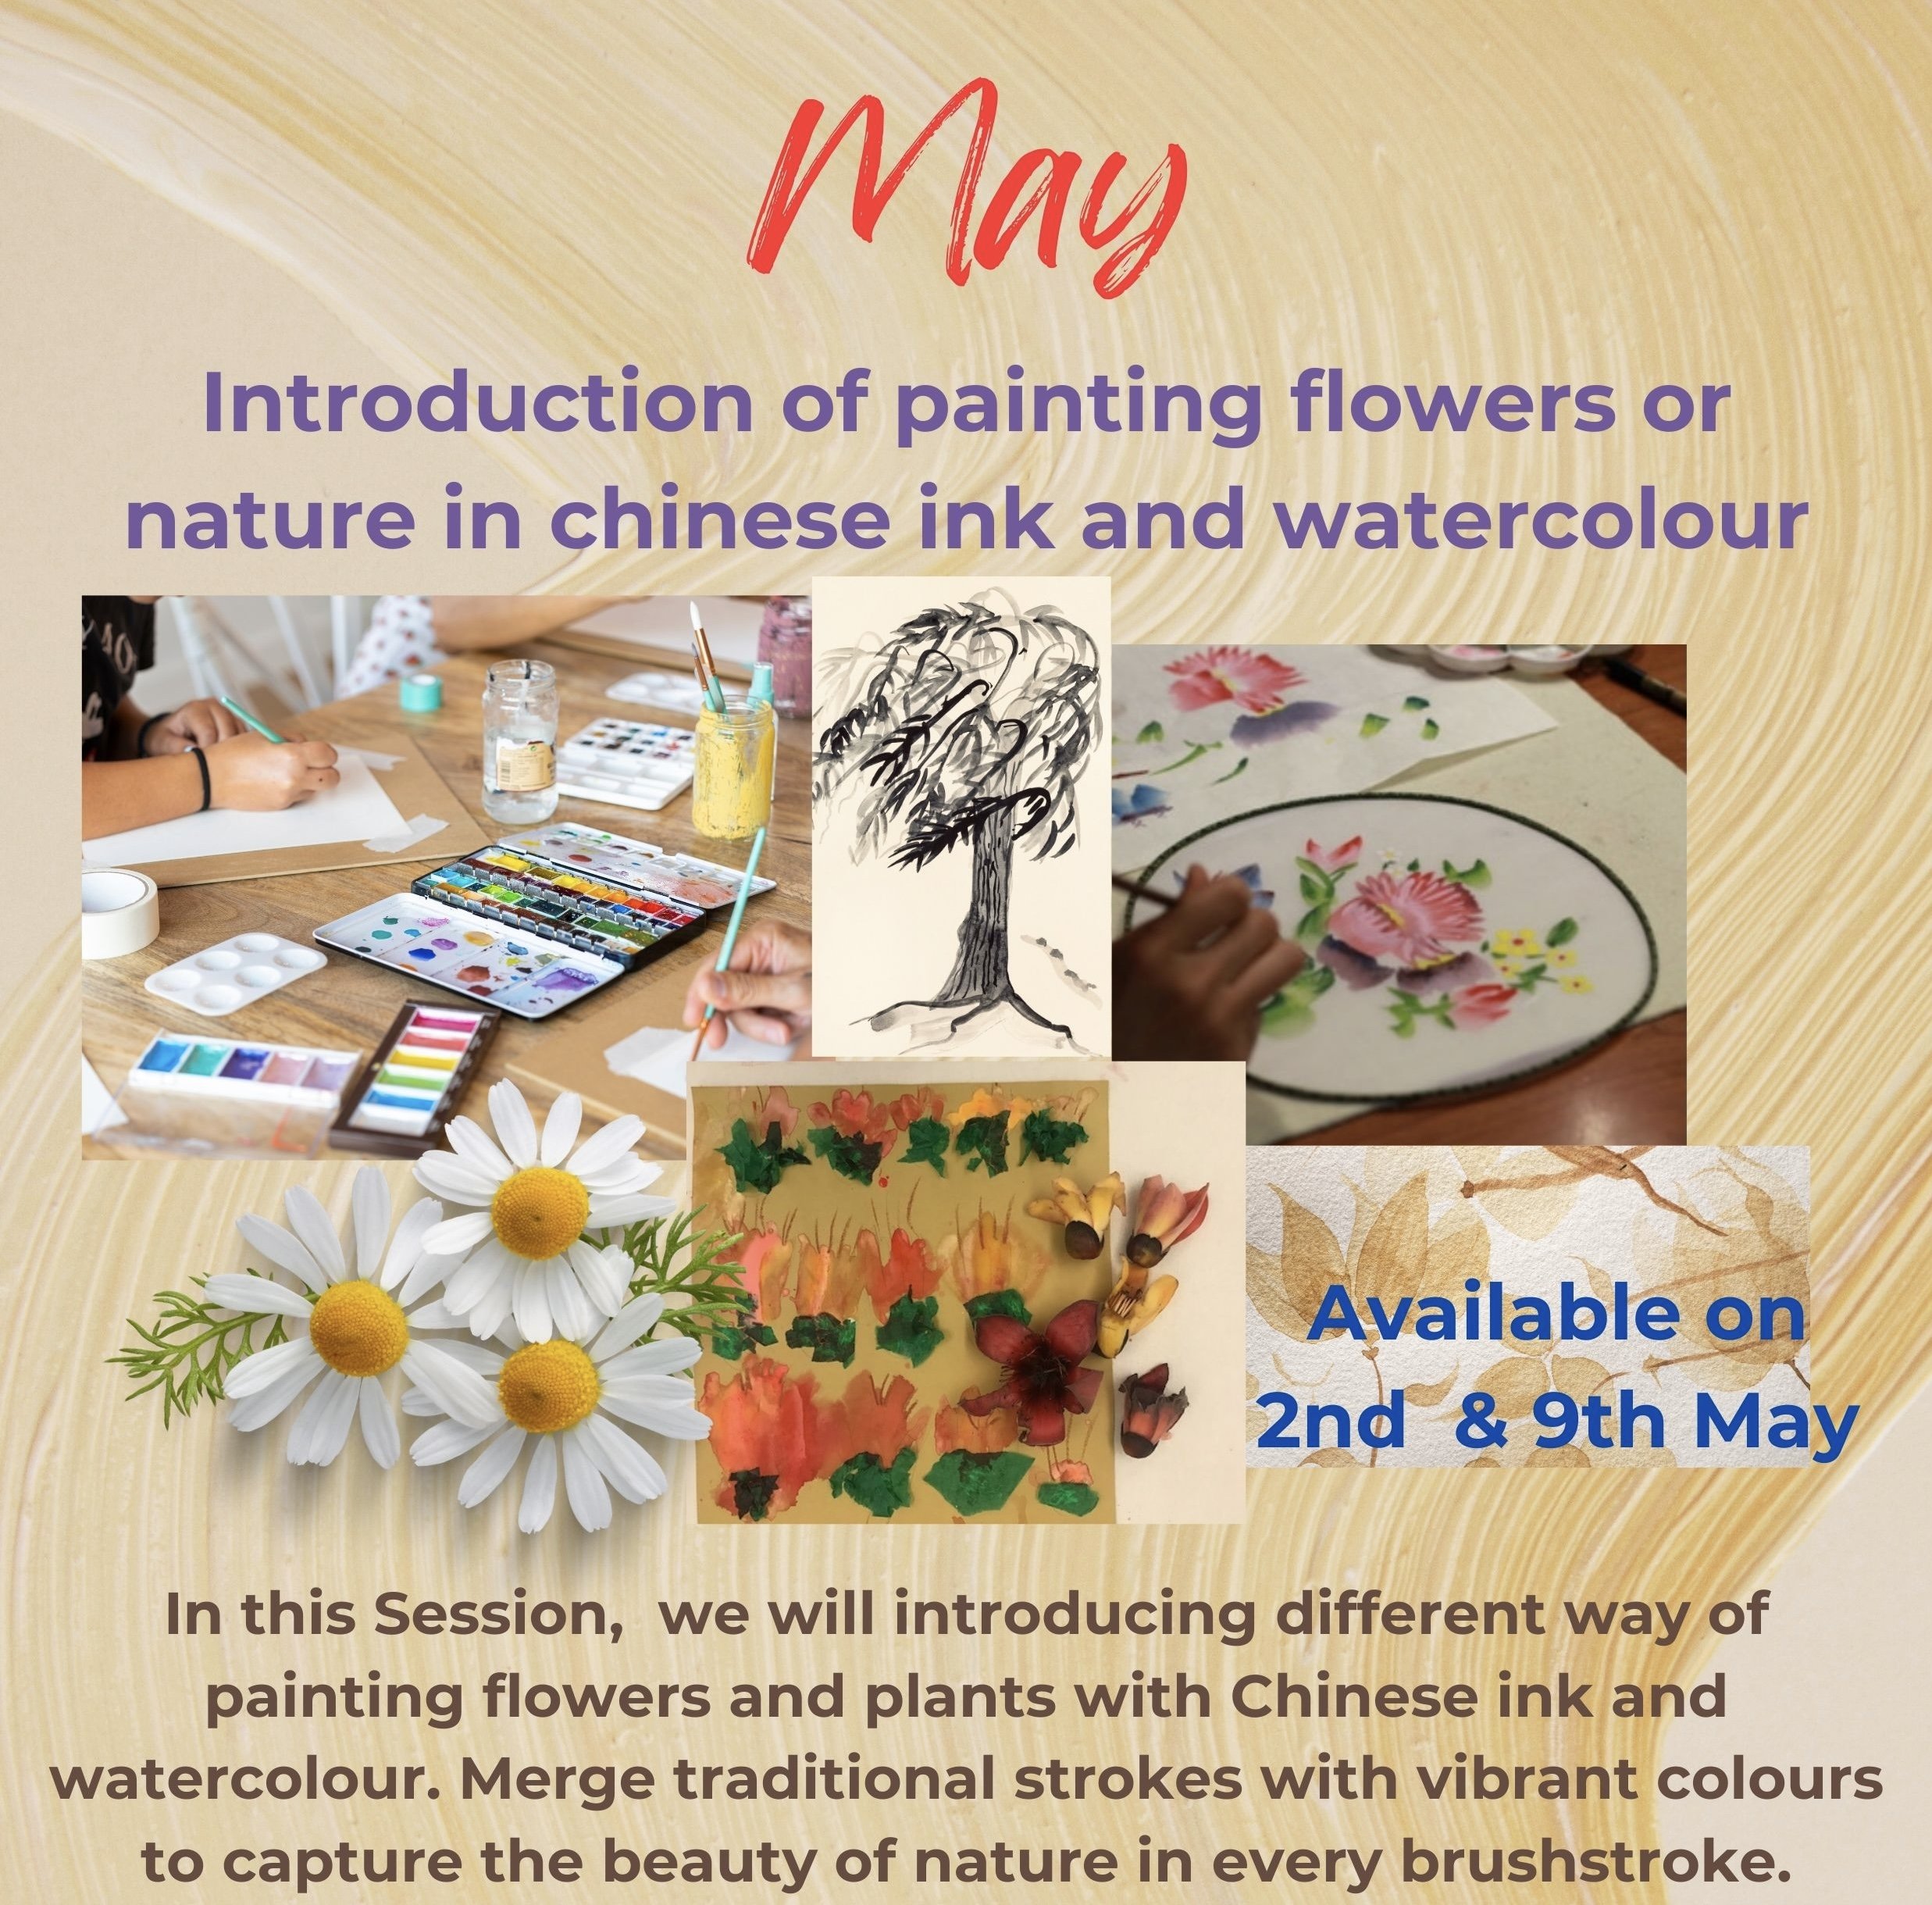 Introduction of painting flowers or nature in chinese ink and watercolour